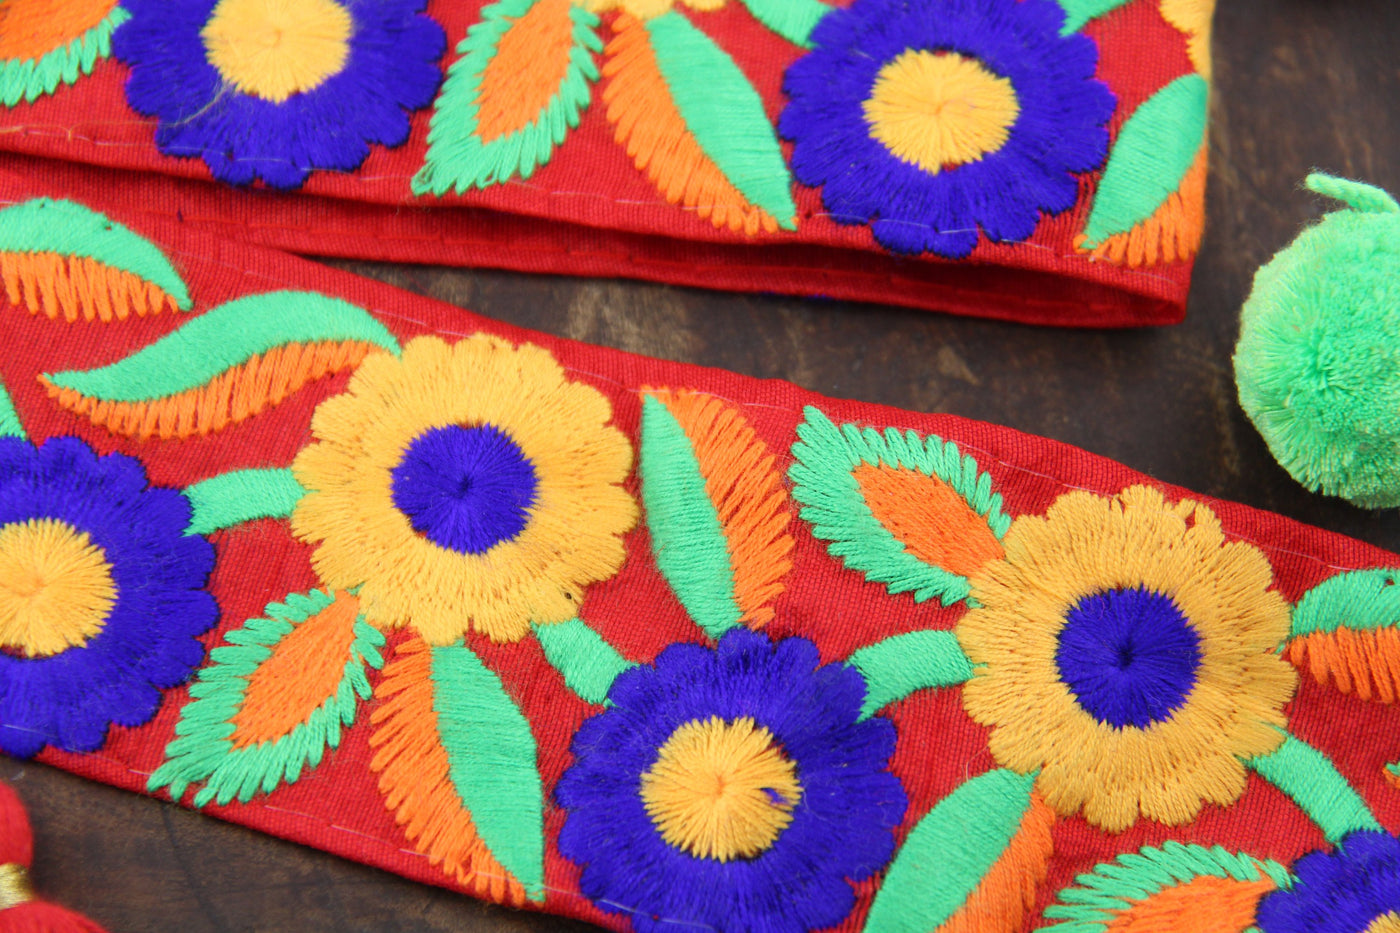 Embroidered Silk Trim: Red, Yellow, Blue Floral Ribbon, 2" x 1 yard